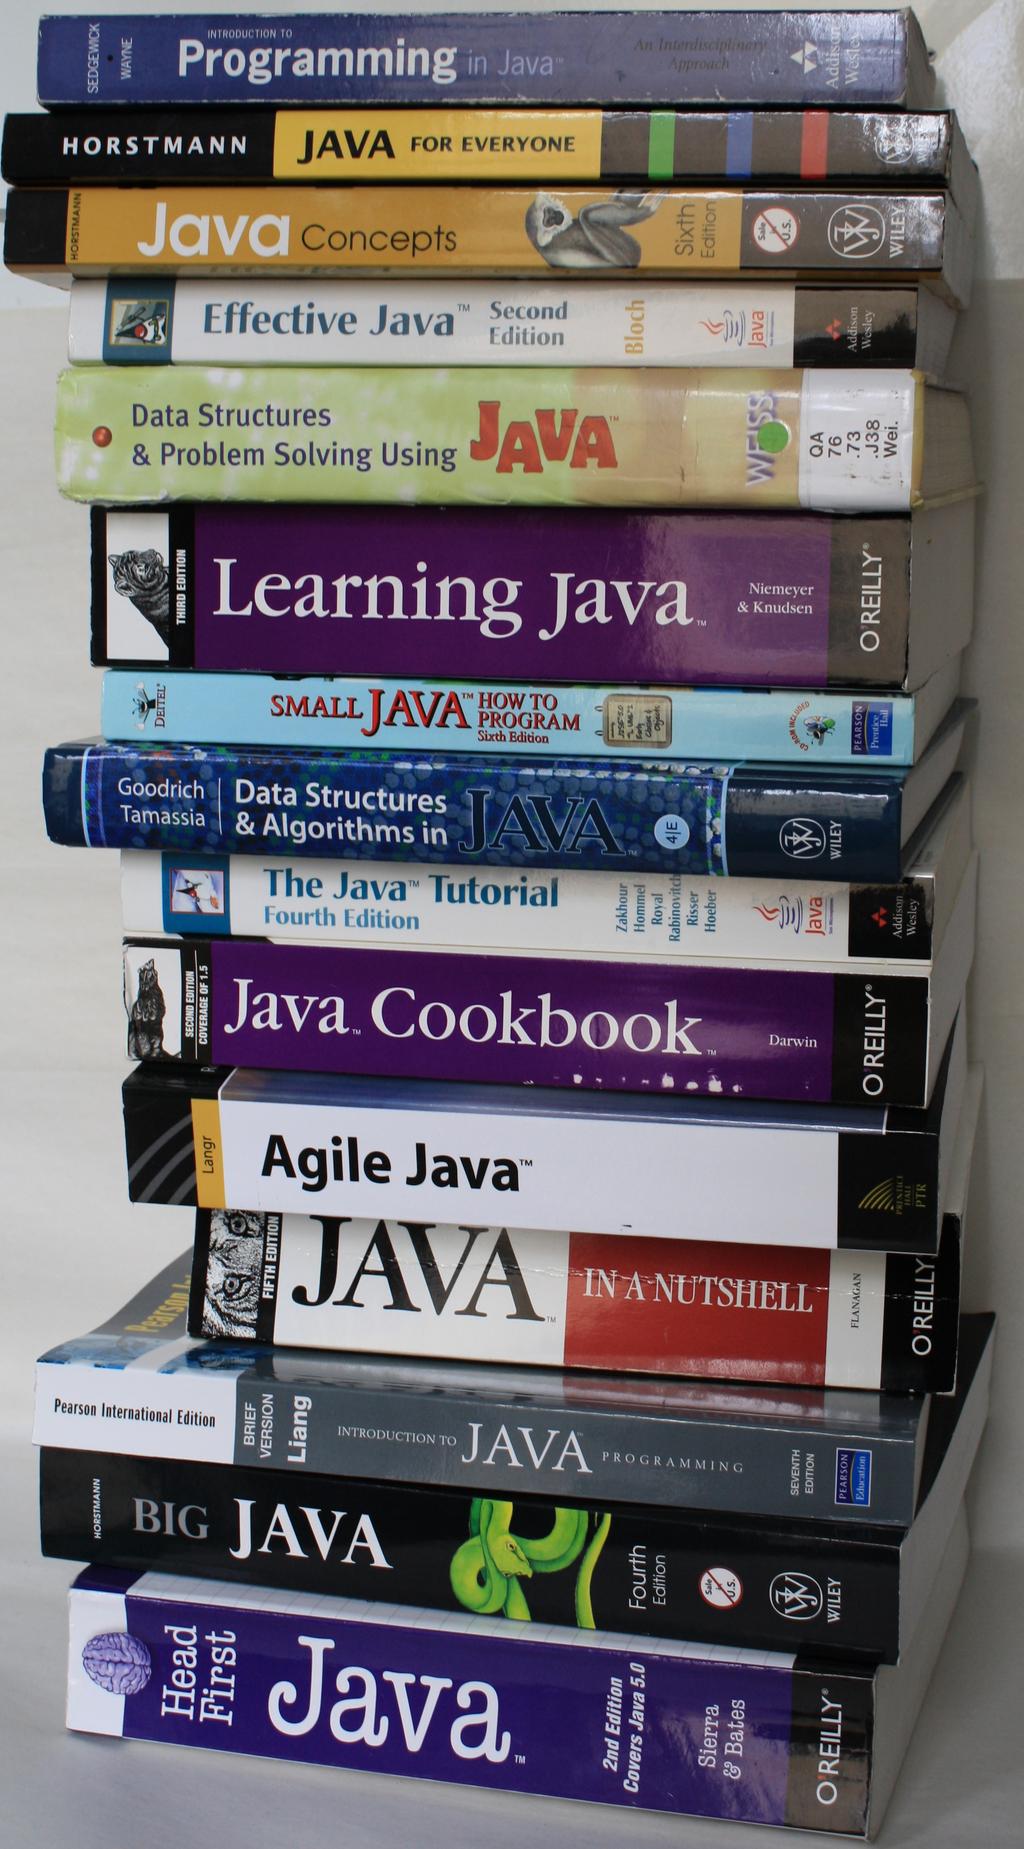 Textbooks Recommended textbook The Java Tutorial: A Short Course on the Basics, Addison-Wesley, 6th Edition. Contains a lot more than you need for this course.